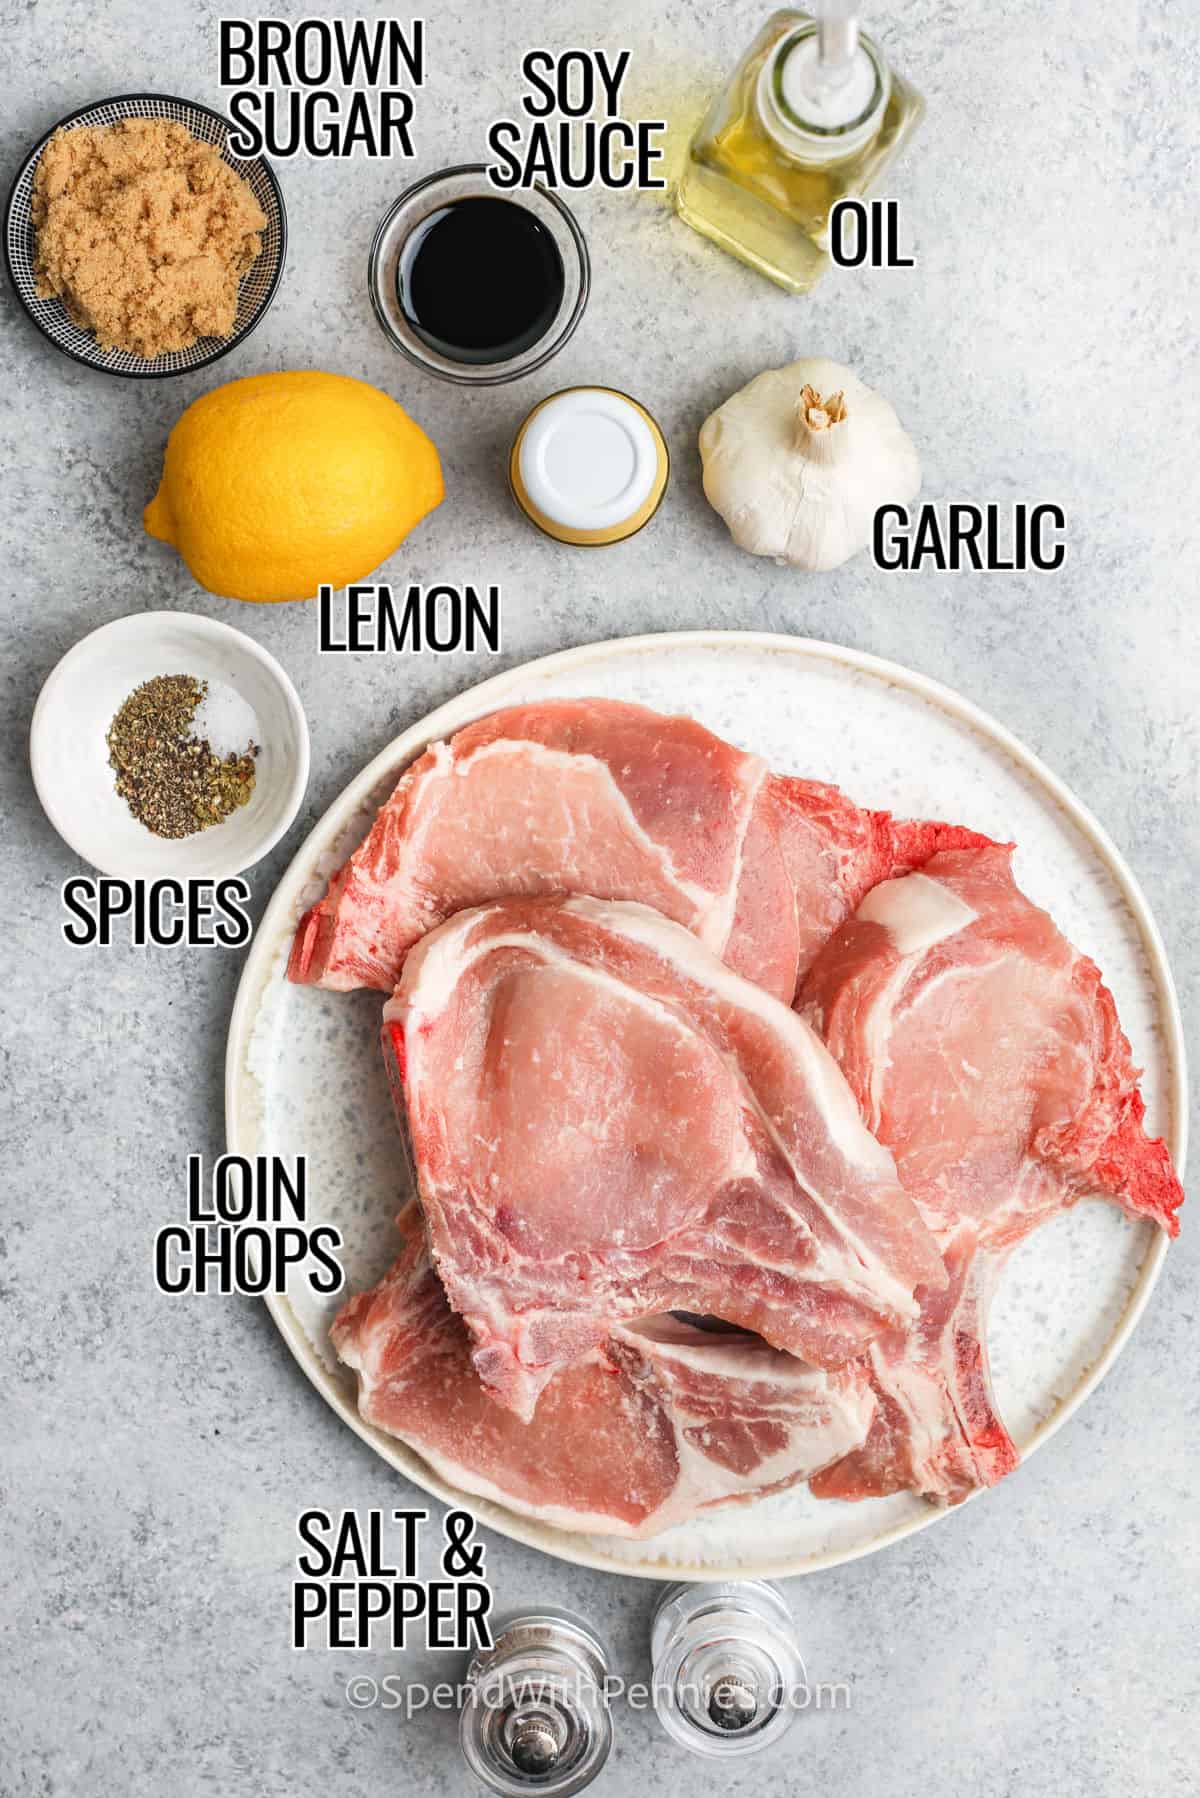 loin chops, spices , lemon , garlic, oil , soy sauce , brown sugar, mustard to make Grilled Pork Chops with labels